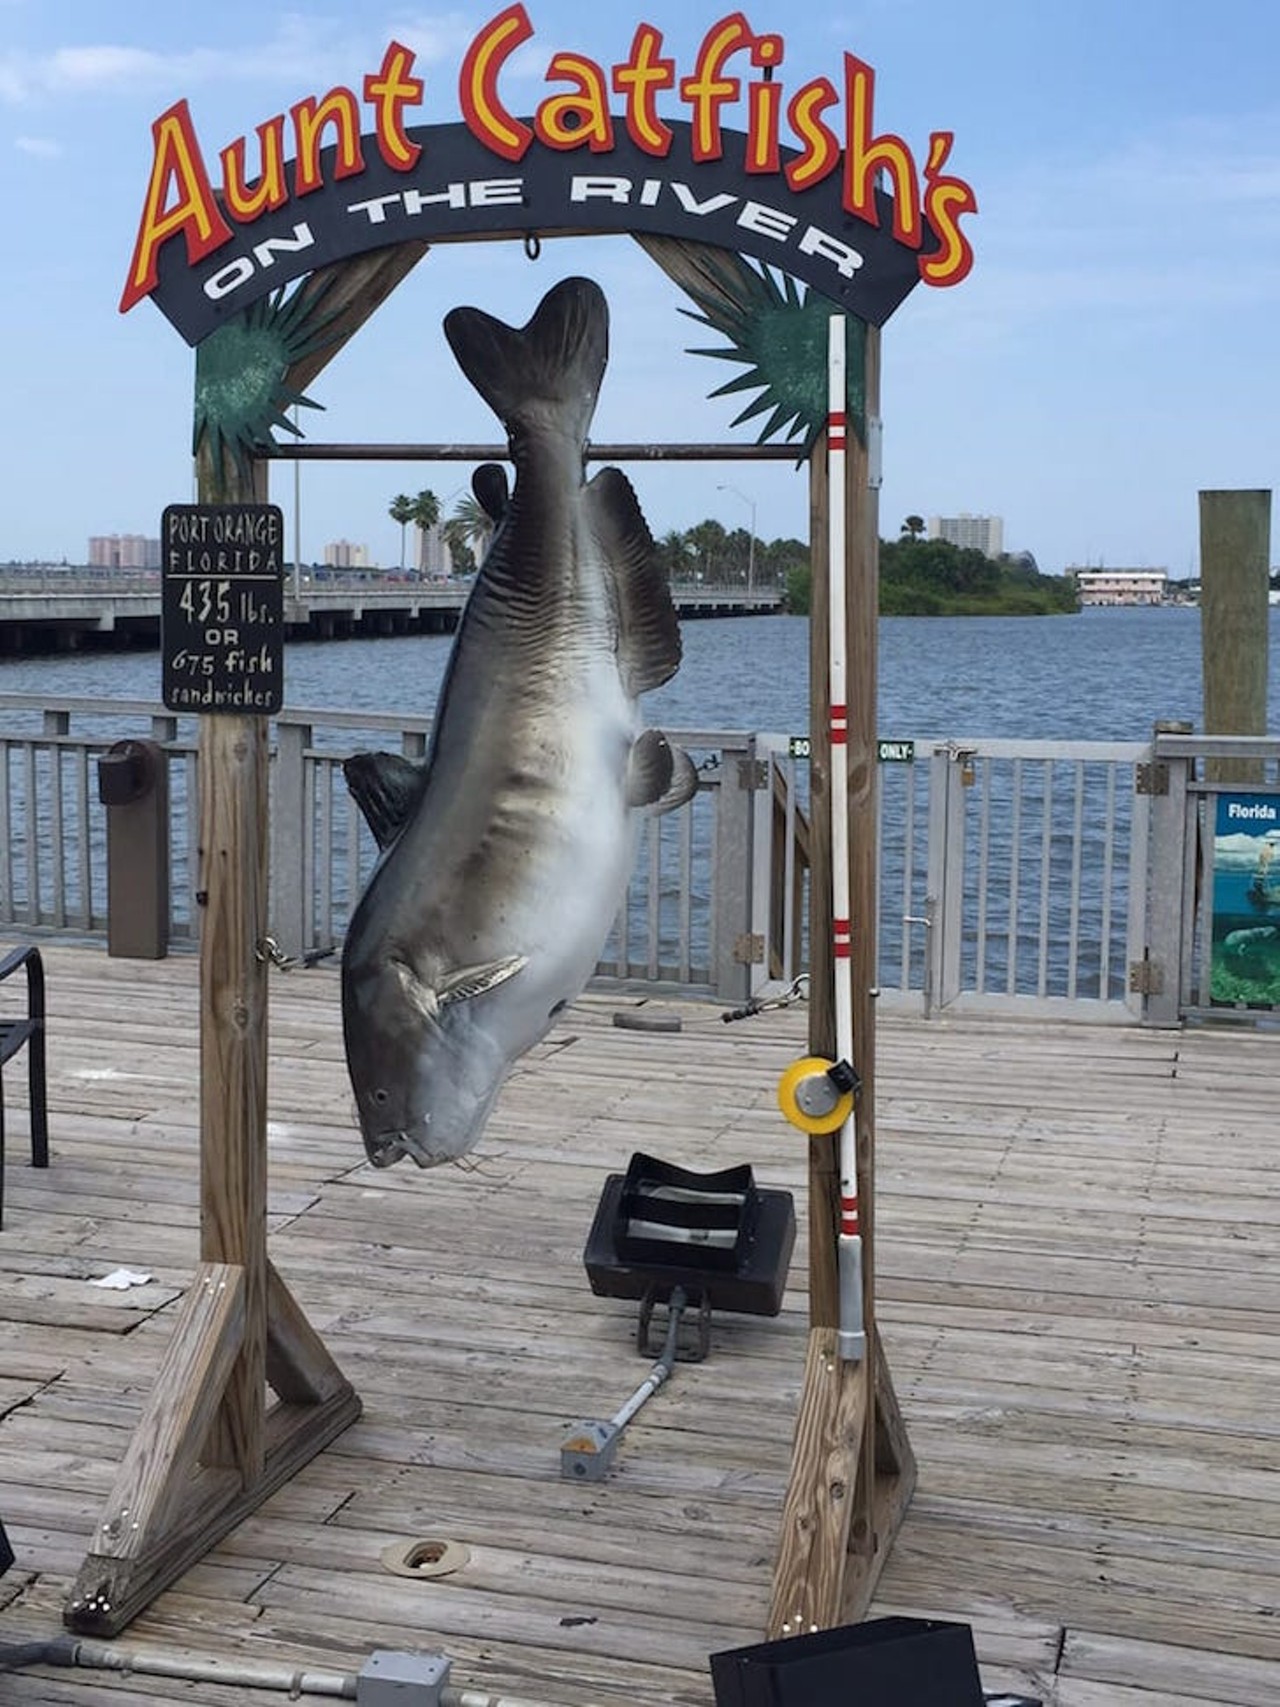 Aunt Catfish’s on the River
4009 Halifax Drive, Port Orange
This family-owned Port Orange spot serves up classic Southern-style seafood right on the water. Don't forget to snap a picture with the giant catfish.